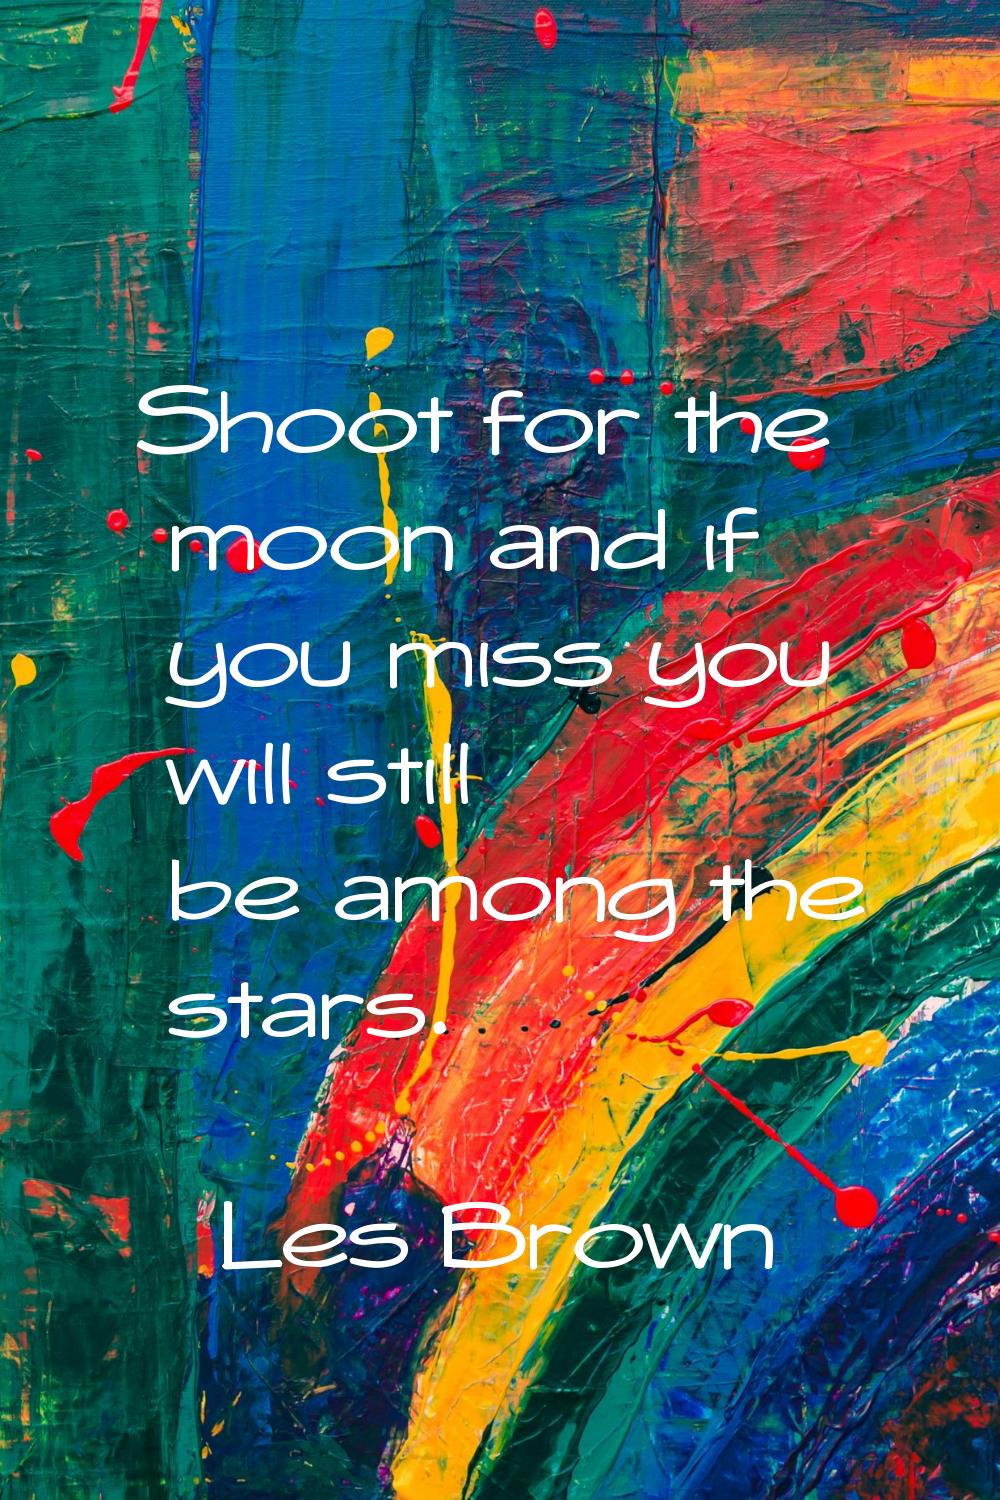 Shoot for the moon and if you miss you will still be among the stars.